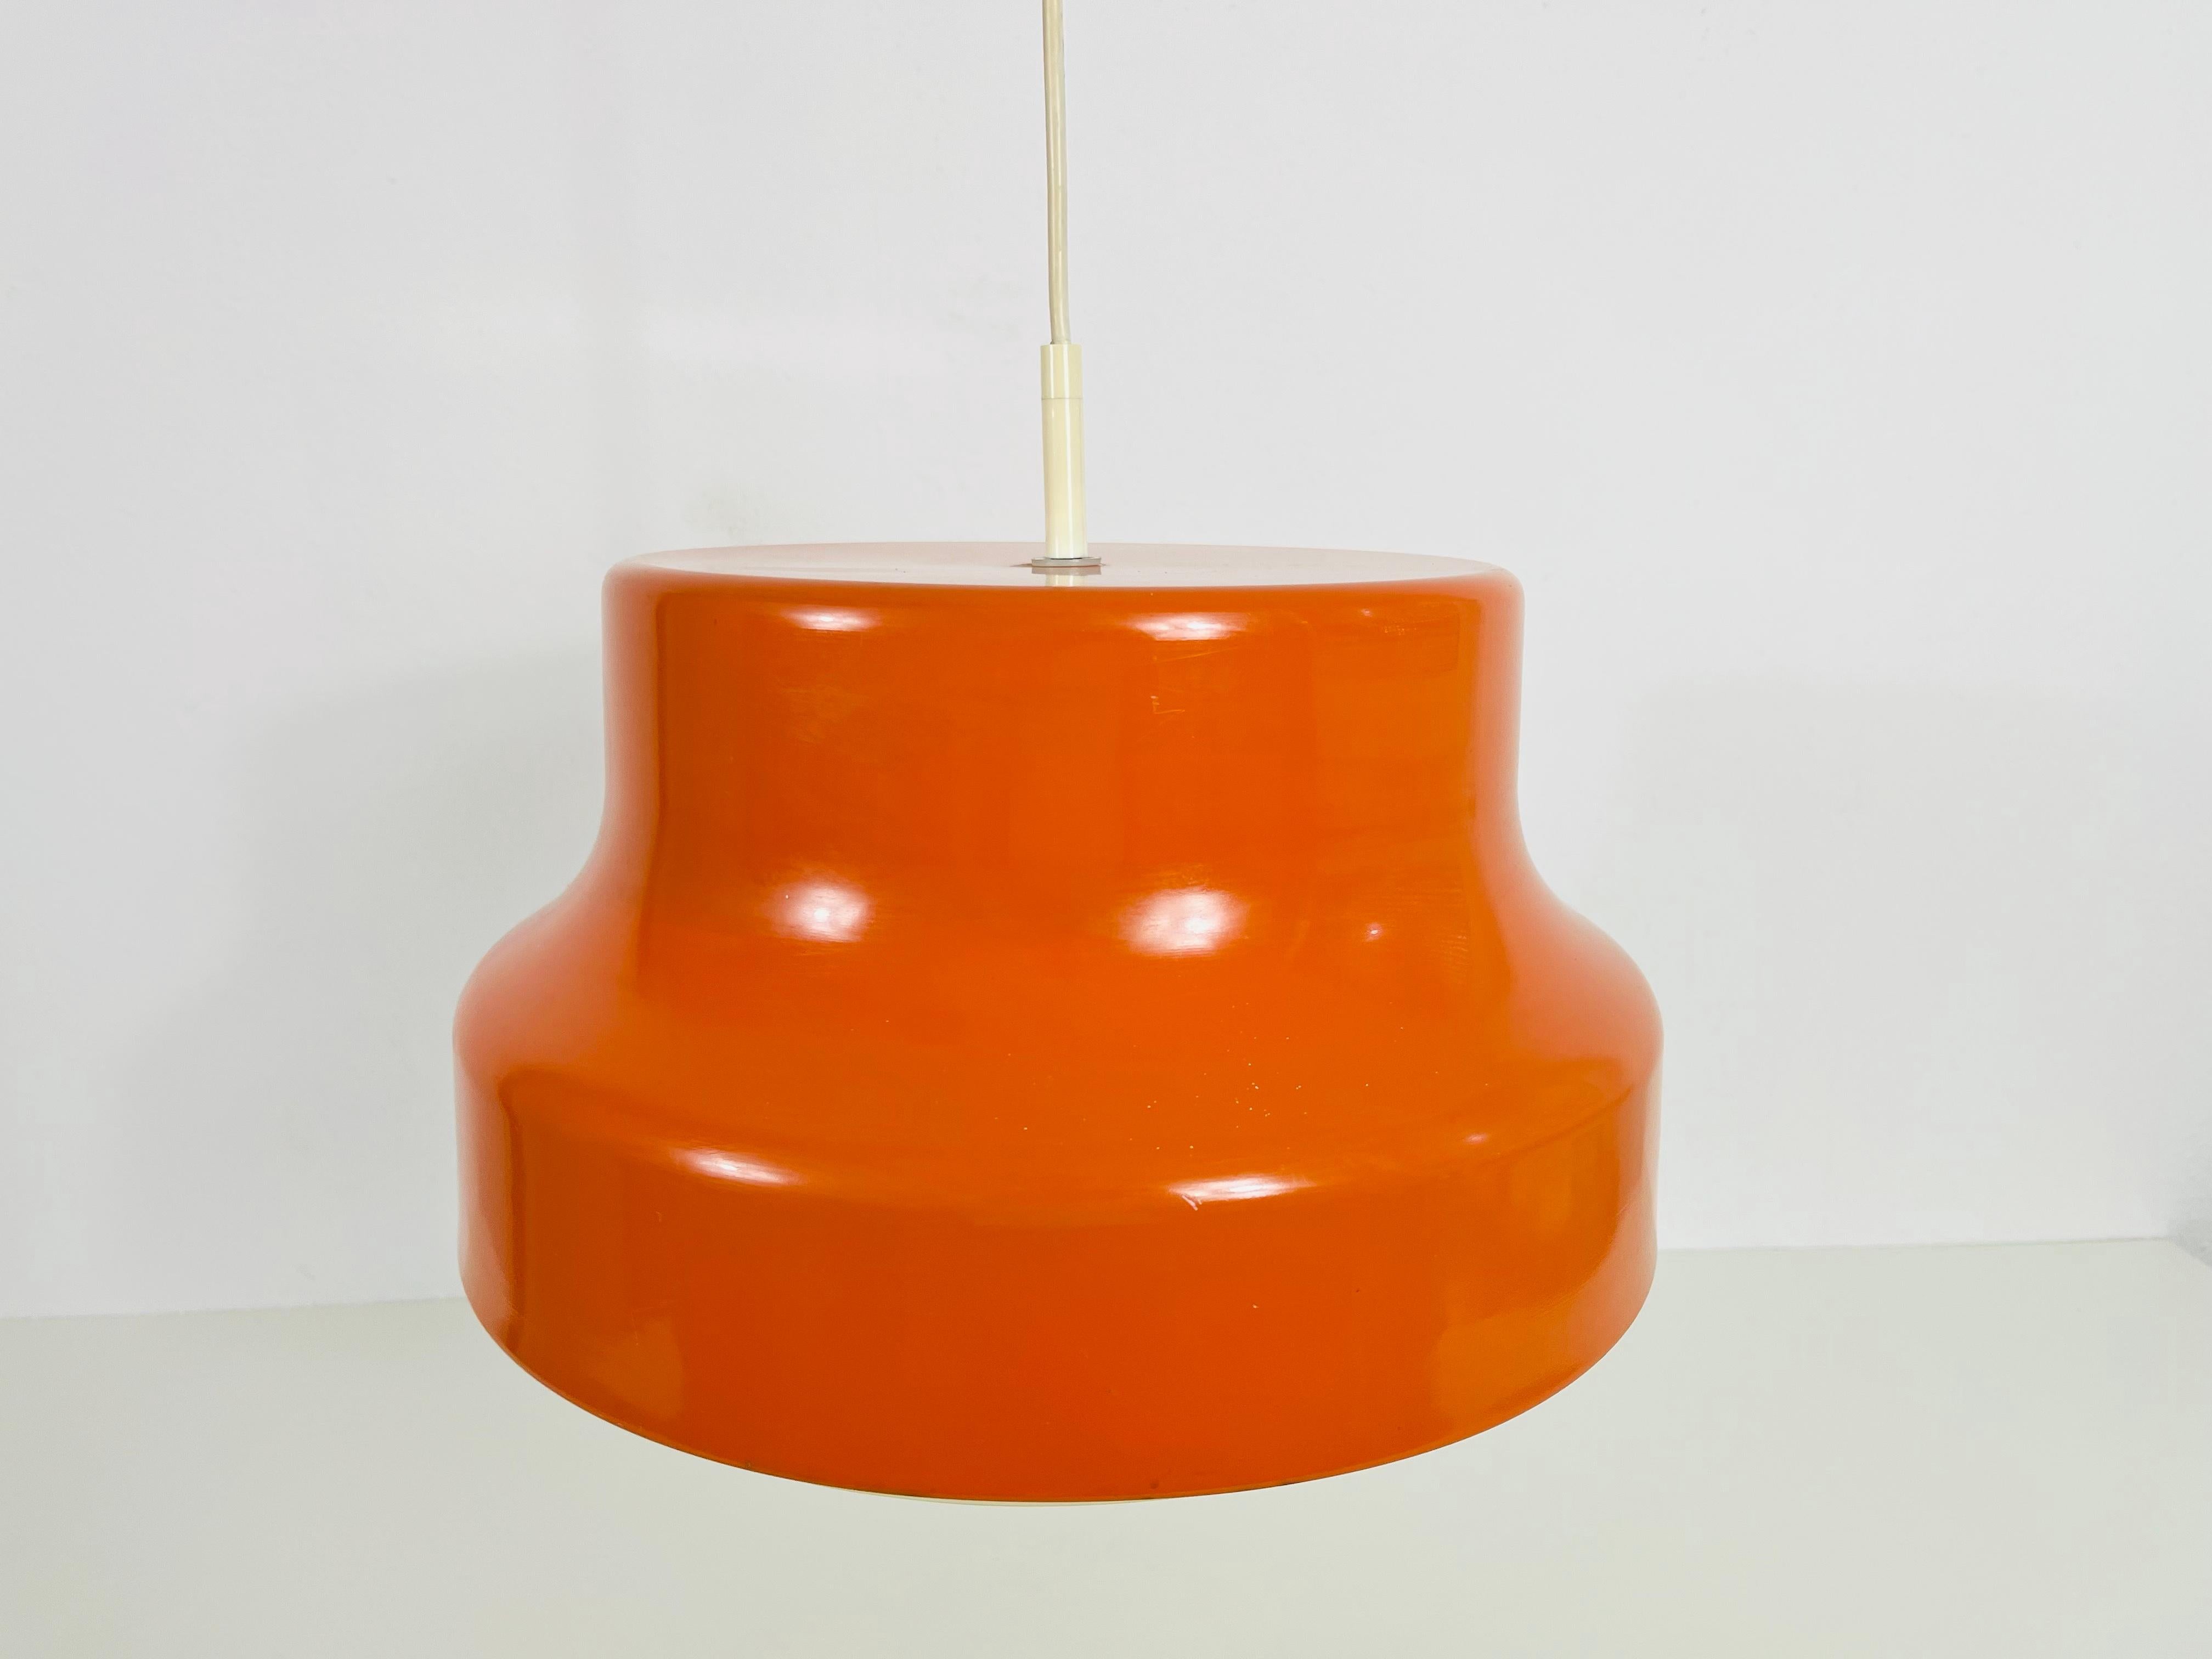 Plastic Bumling pendant lamp made in the 1970s.

Measures: 

Height of shade: 21 cm
Max height: 90 cm
Diameter: 36 cm

The light requires one E27 light bulb. Works with both 120V/220V. Good vintage condition.

Free worldwide express